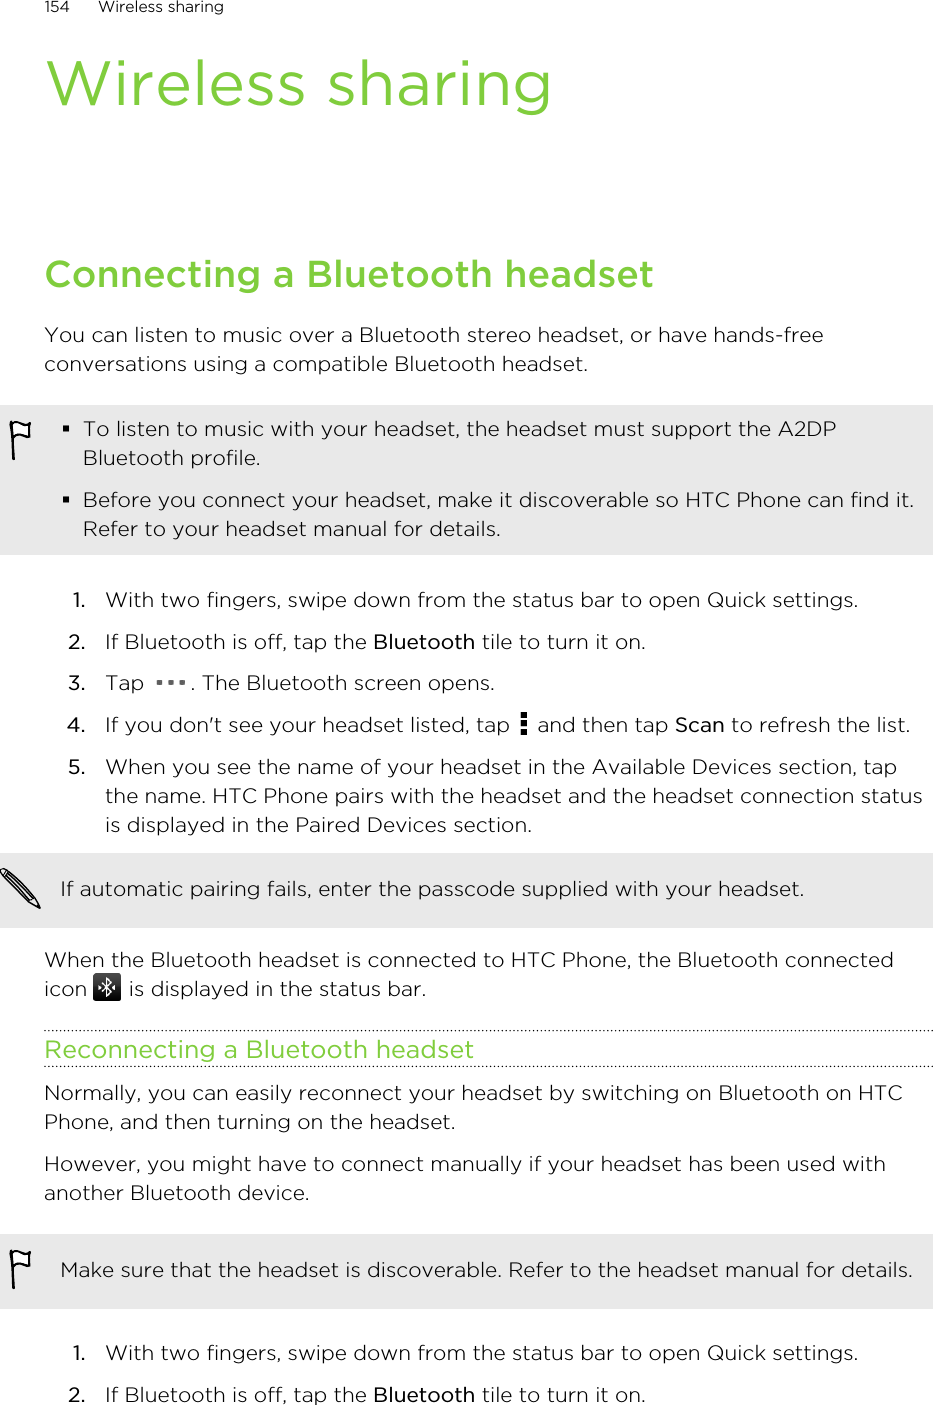 Wireless sharingConnecting a Bluetooth headsetYou can listen to music over a Bluetooth stereo headset, or have hands-freeconversations using a compatible Bluetooth headset.§To listen to music with your headset, the headset must support the A2DPBluetooth profile.§Before you connect your headset, make it discoverable so HTC Phone can find it.Refer to your headset manual for details.1. With two fingers, swipe down from the status bar to open Quick settings.2. If Bluetooth is off, tap the Bluetooth tile to turn it on.3. Tap  . The Bluetooth screen opens.4. If you don&apos;t see your headset listed, tap   and then tap Scan to refresh the list.5. When you see the name of your headset in the Available Devices section, tapthe name. HTC Phone pairs with the headset and the headset connection statusis displayed in the Paired Devices section.If automatic pairing fails, enter the passcode supplied with your headset.When the Bluetooth headset is connected to HTC Phone, the Bluetooth connectedicon   is displayed in the status bar.Reconnecting a Bluetooth headsetNormally, you can easily reconnect your headset by switching on Bluetooth on HTCPhone, and then turning on the headset.However, you might have to connect manually if your headset has been used withanother Bluetooth device.Make sure that the headset is discoverable. Refer to the headset manual for details.1. With two fingers, swipe down from the status bar to open Quick settings.2. If Bluetooth is off, tap the Bluetooth tile to turn it on.154 Wireless sharing